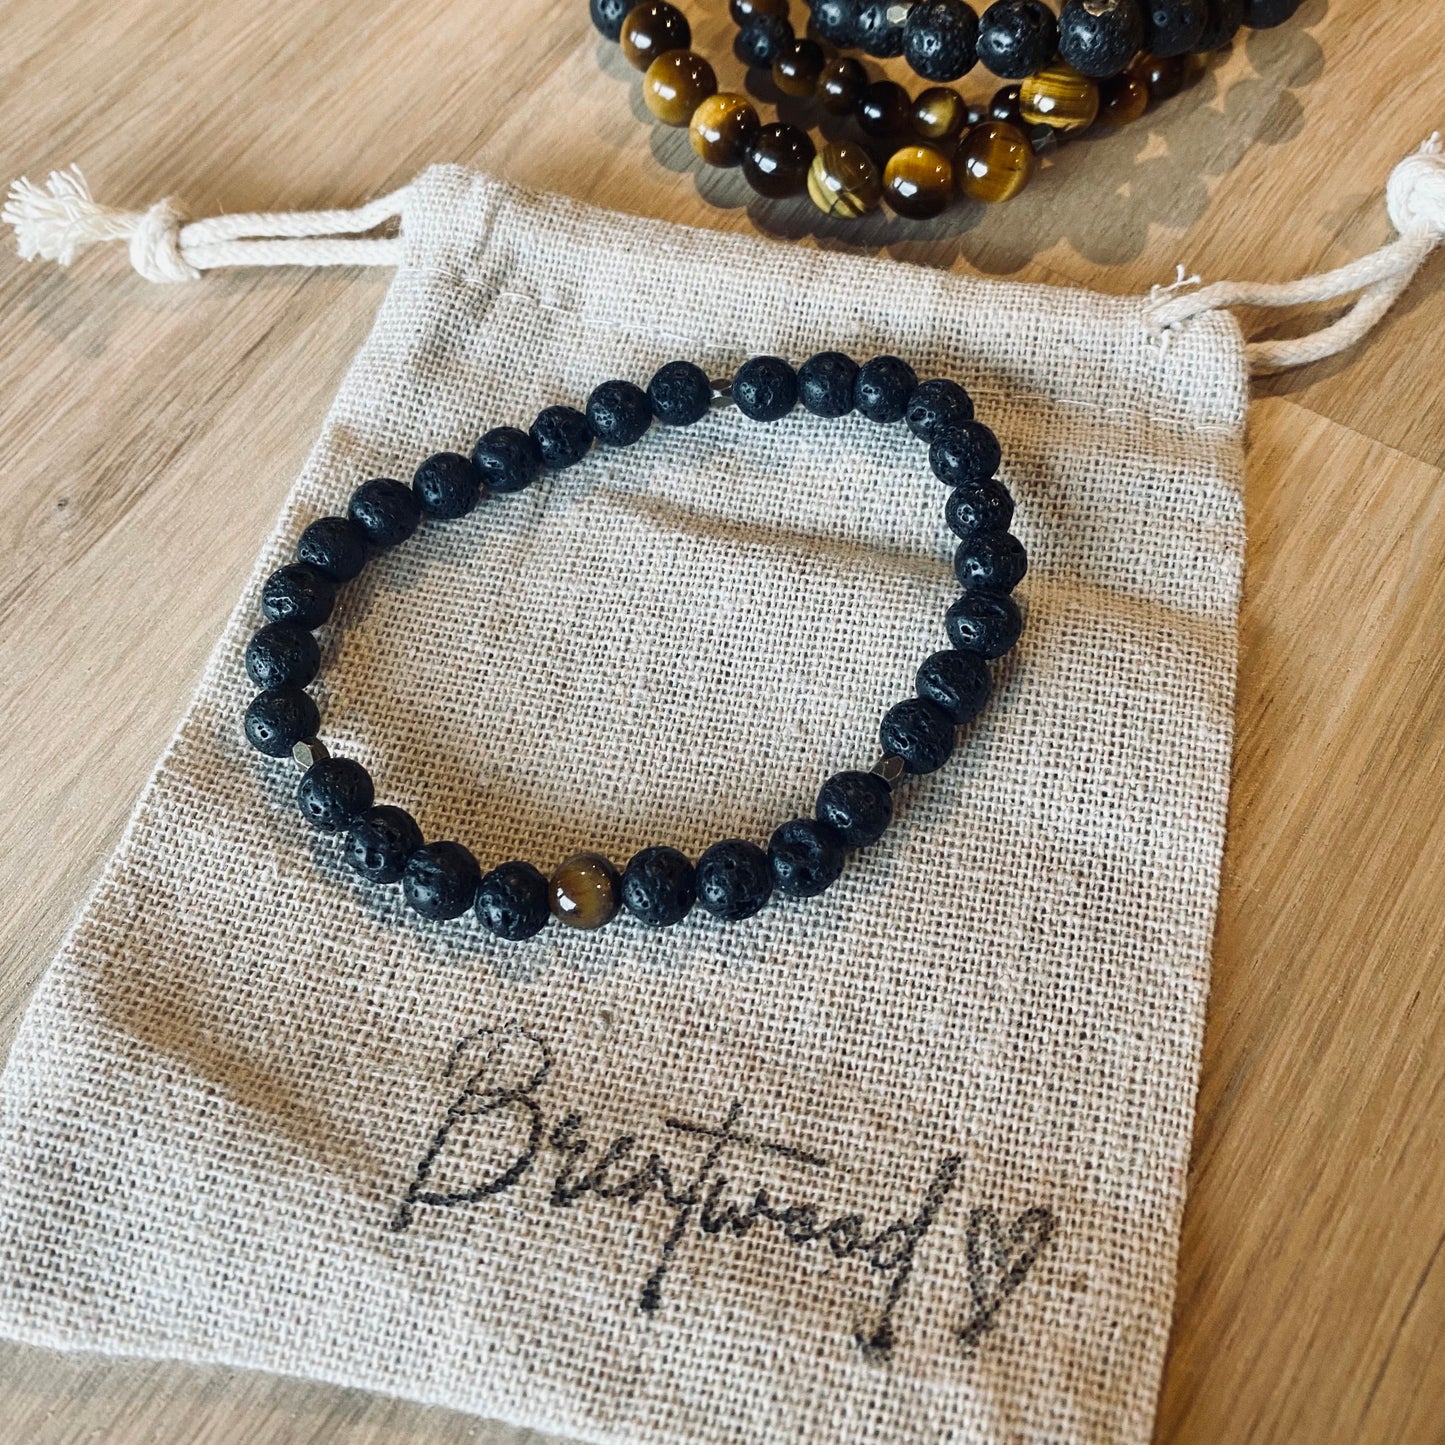 Lava 6 aroma bracelet/diffuser bracelet made from 6mm black lava stone & a single tiger eye bead with antiqued gold faceted embellishments. Laid on cloth pouch/drawstring bag stamped with “Brentwood” and a heart.